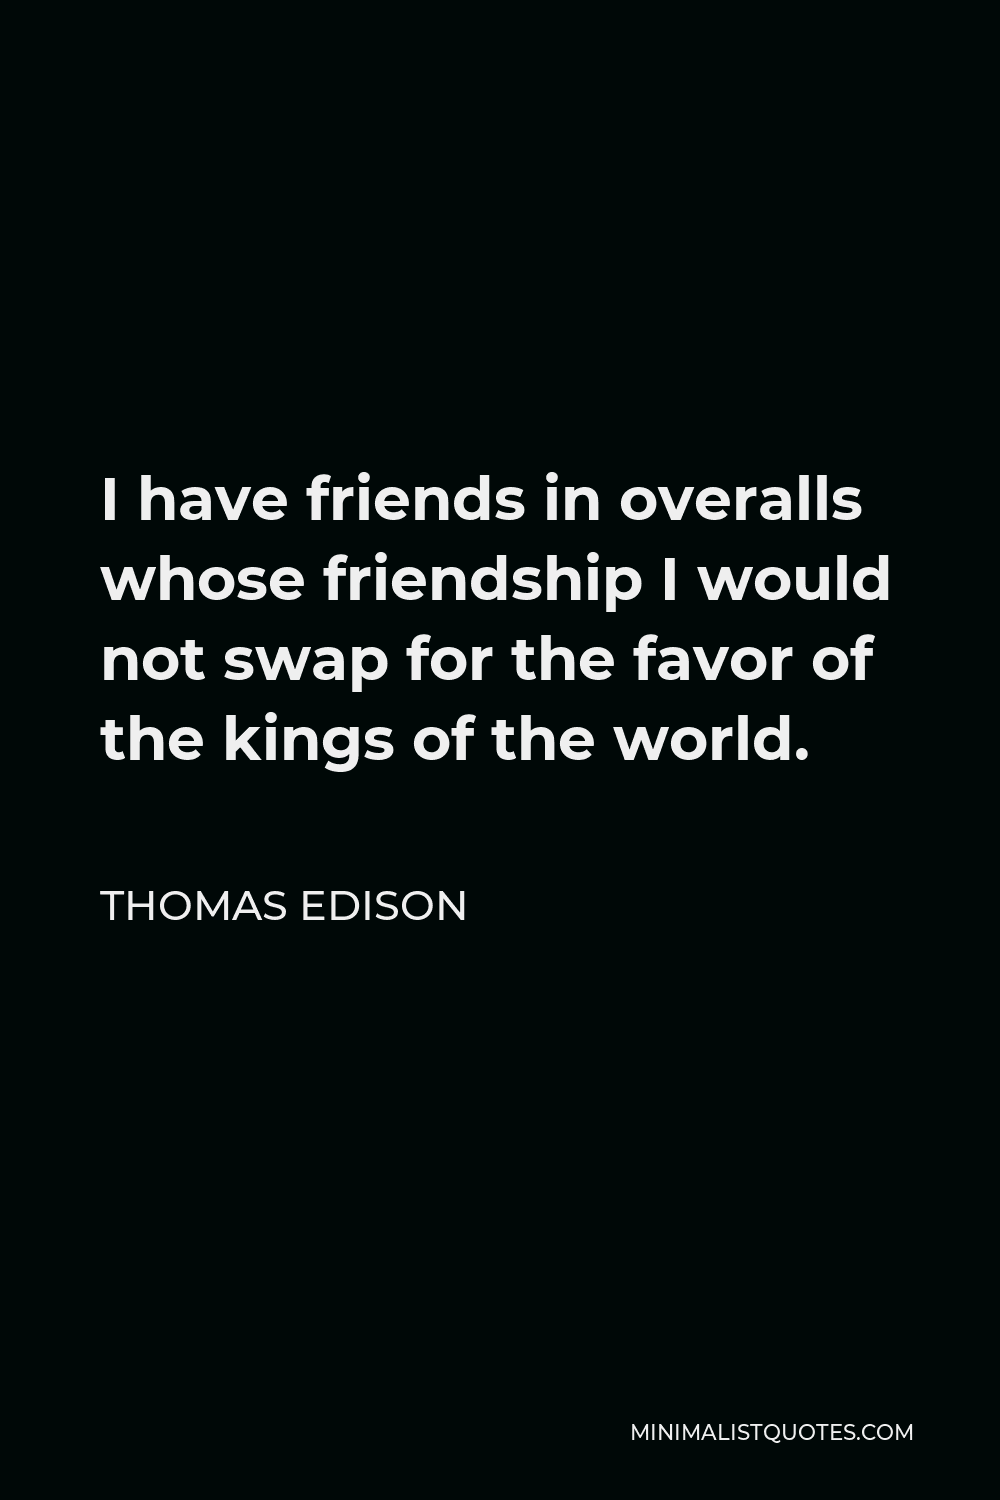 Thomas Edison Quote - I have friends in overalls whose friendship I would not swap for the favor of the kings of the world.